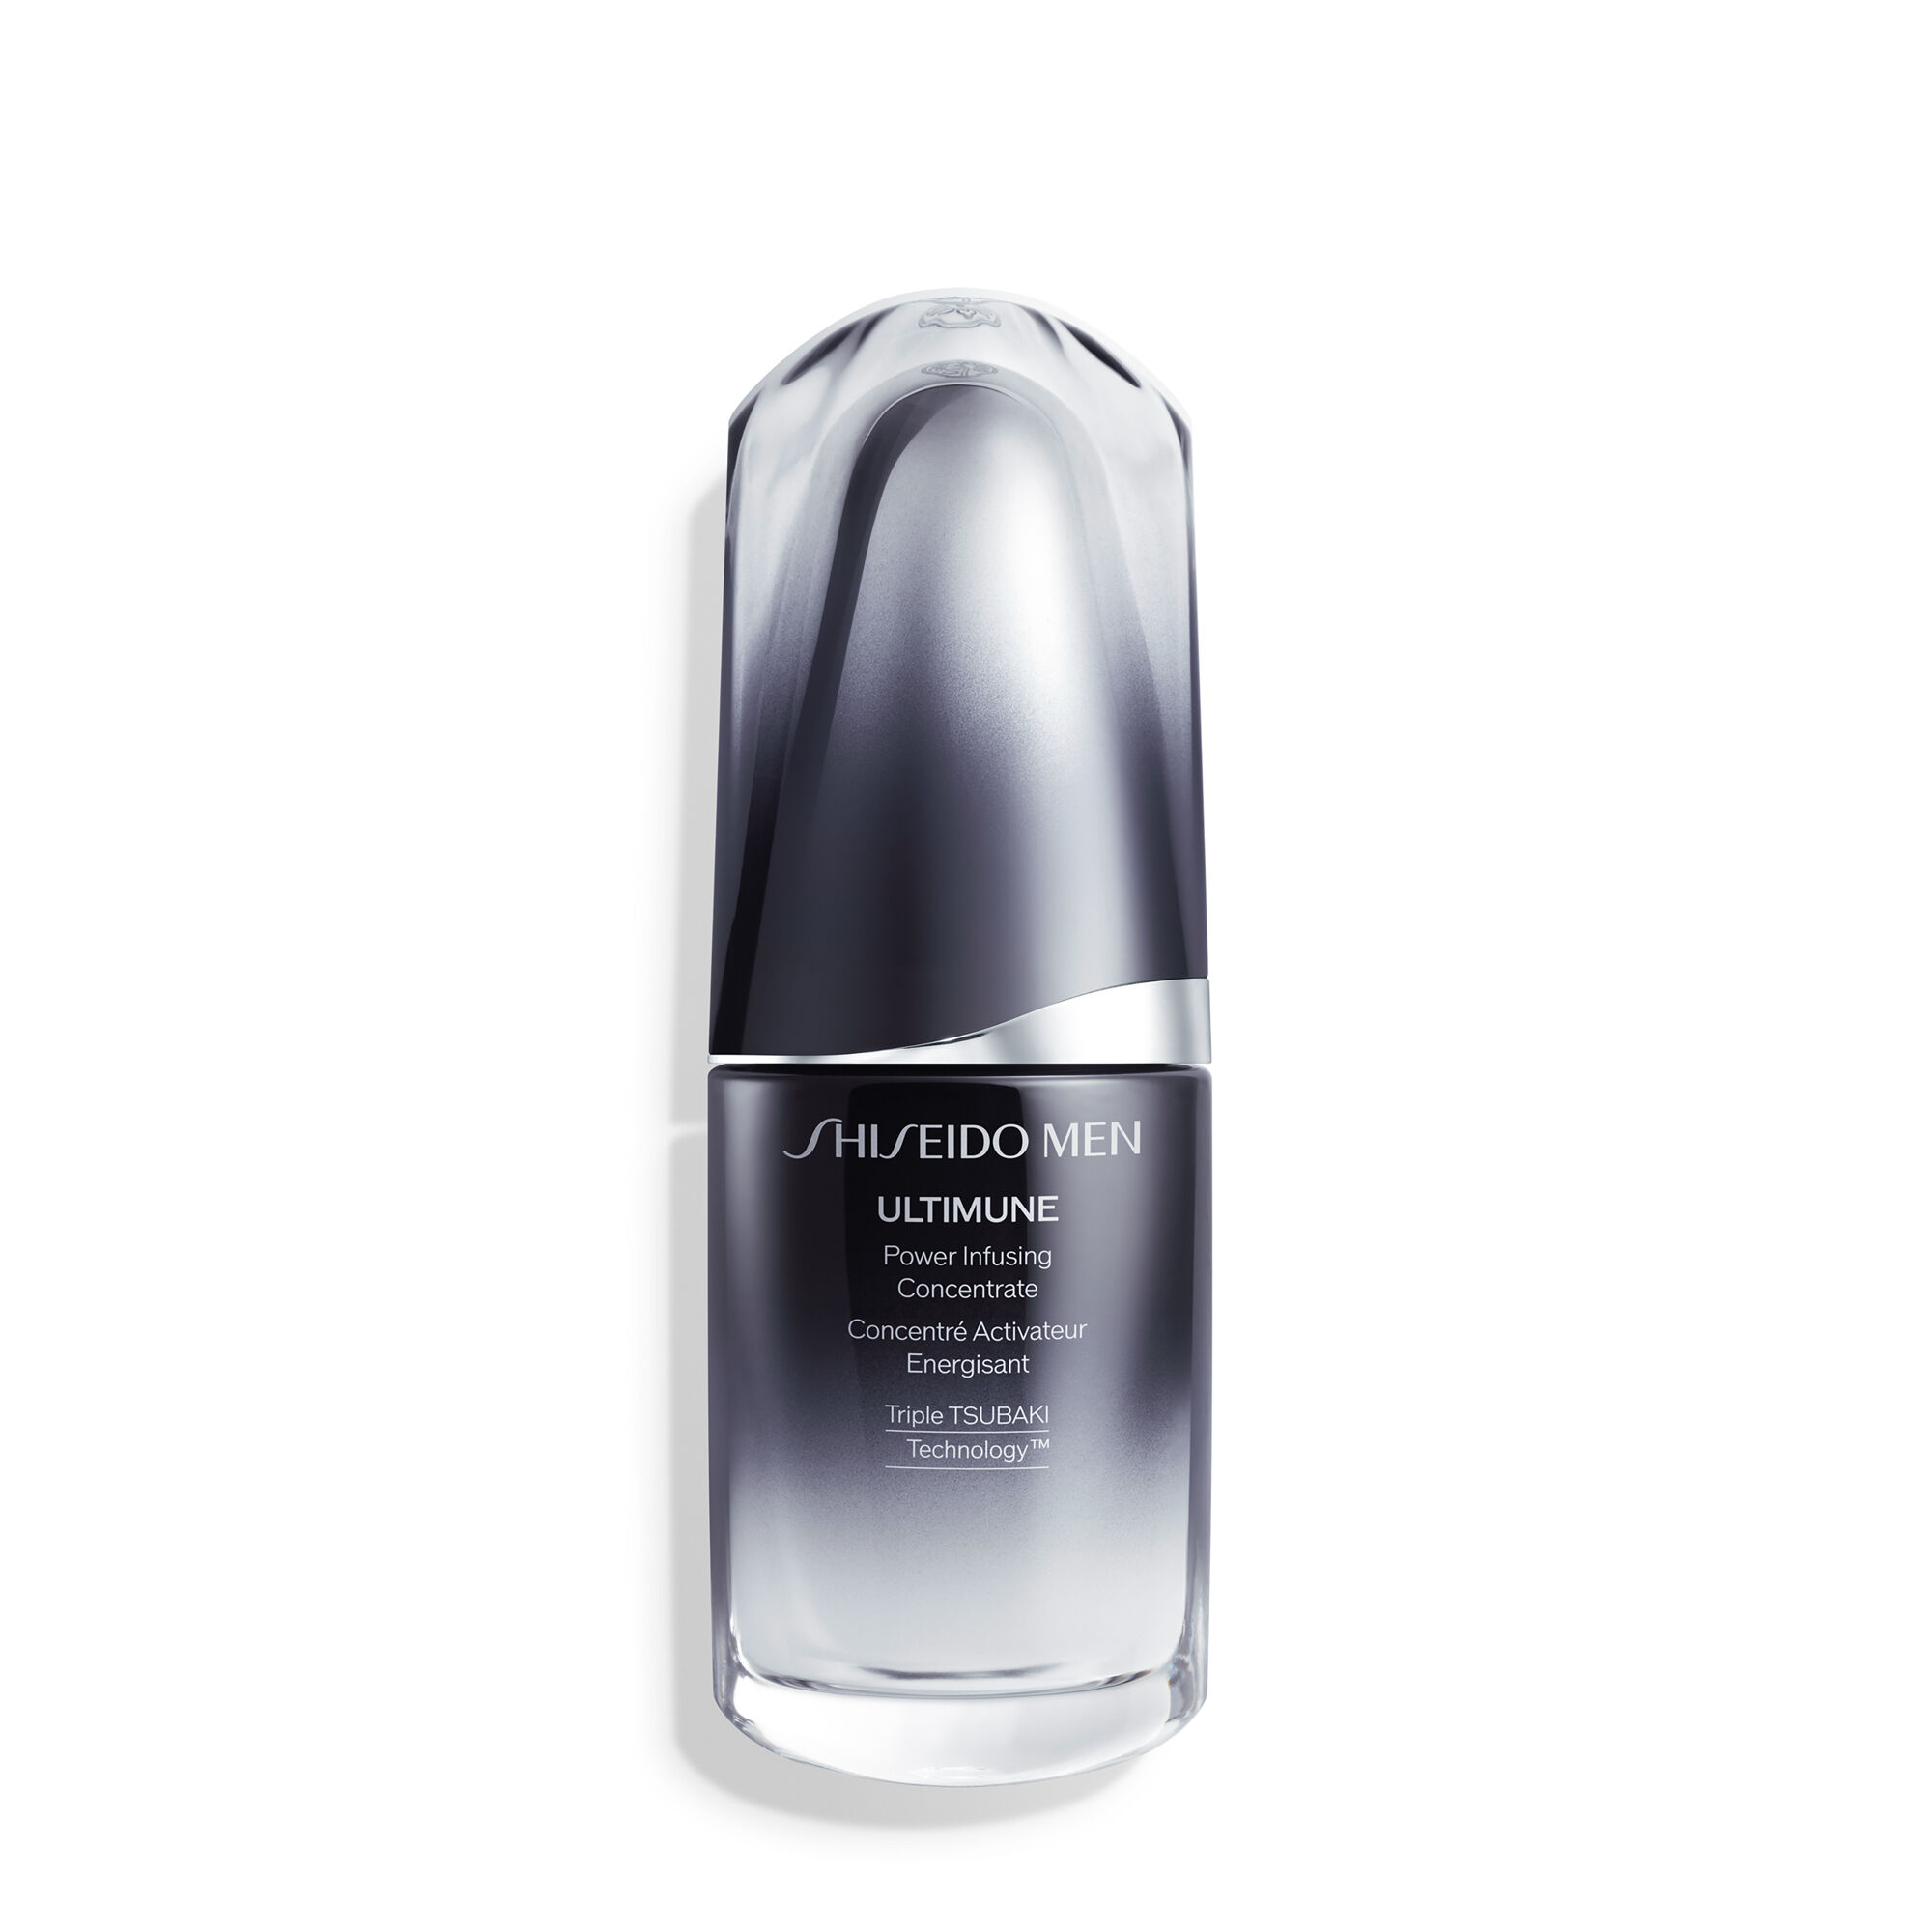 Ultimune Power Infusing Concentrate Serum for Men | SHISEIDO